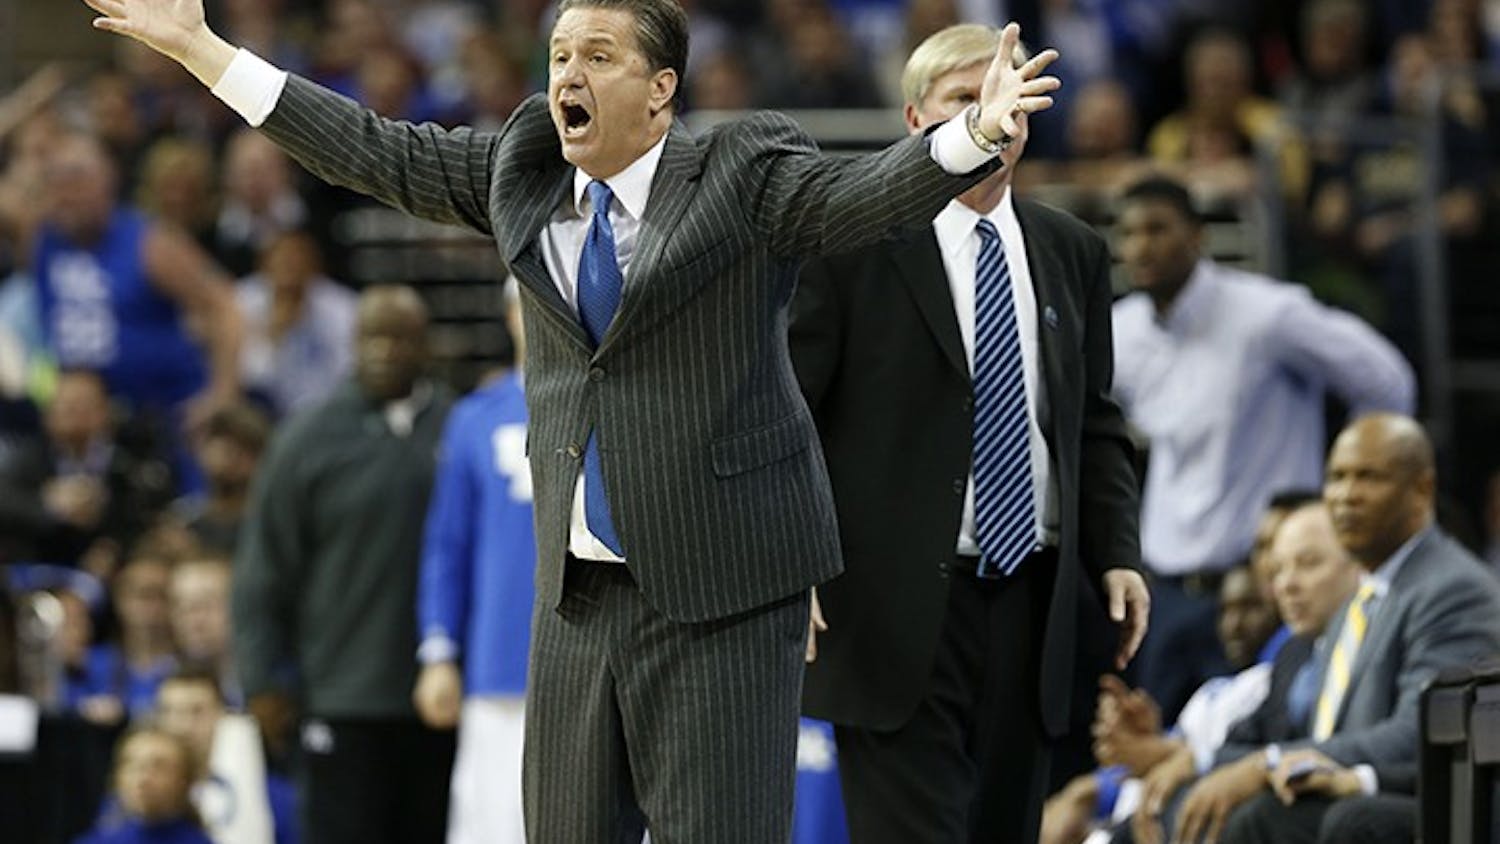 Kentucky head coach John Calipari questions a call in the second half against Notre Dame in the NCAA Tournament&apos;s Elite 8 on Saturday, March 28, 2015, at Quicken Loans Arena in Cleveland. Kentucky advanced, 68-66. (Charles Bertram/Lexington Herald-Leader/TNS)